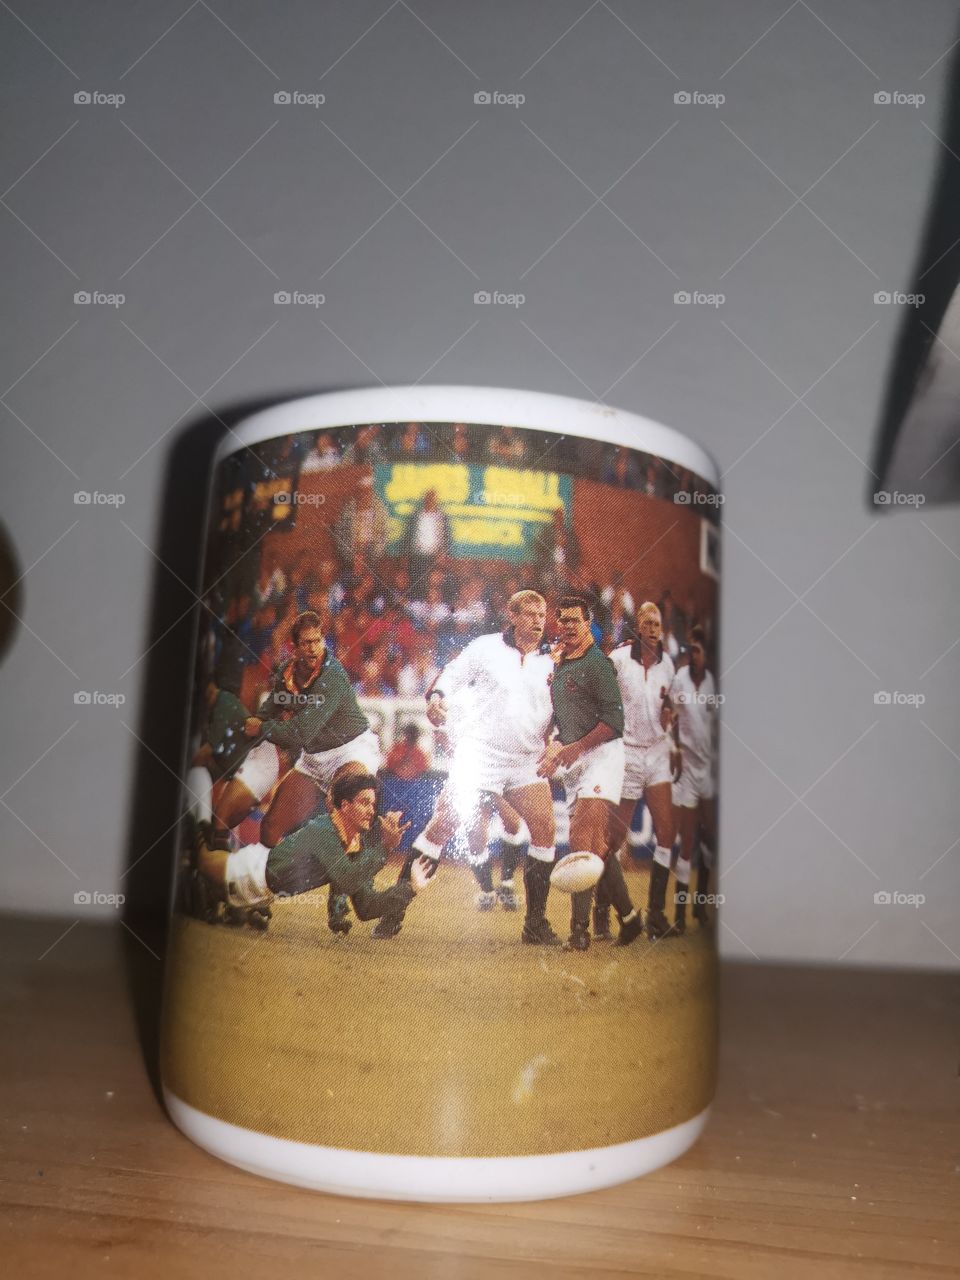 1991 currycup